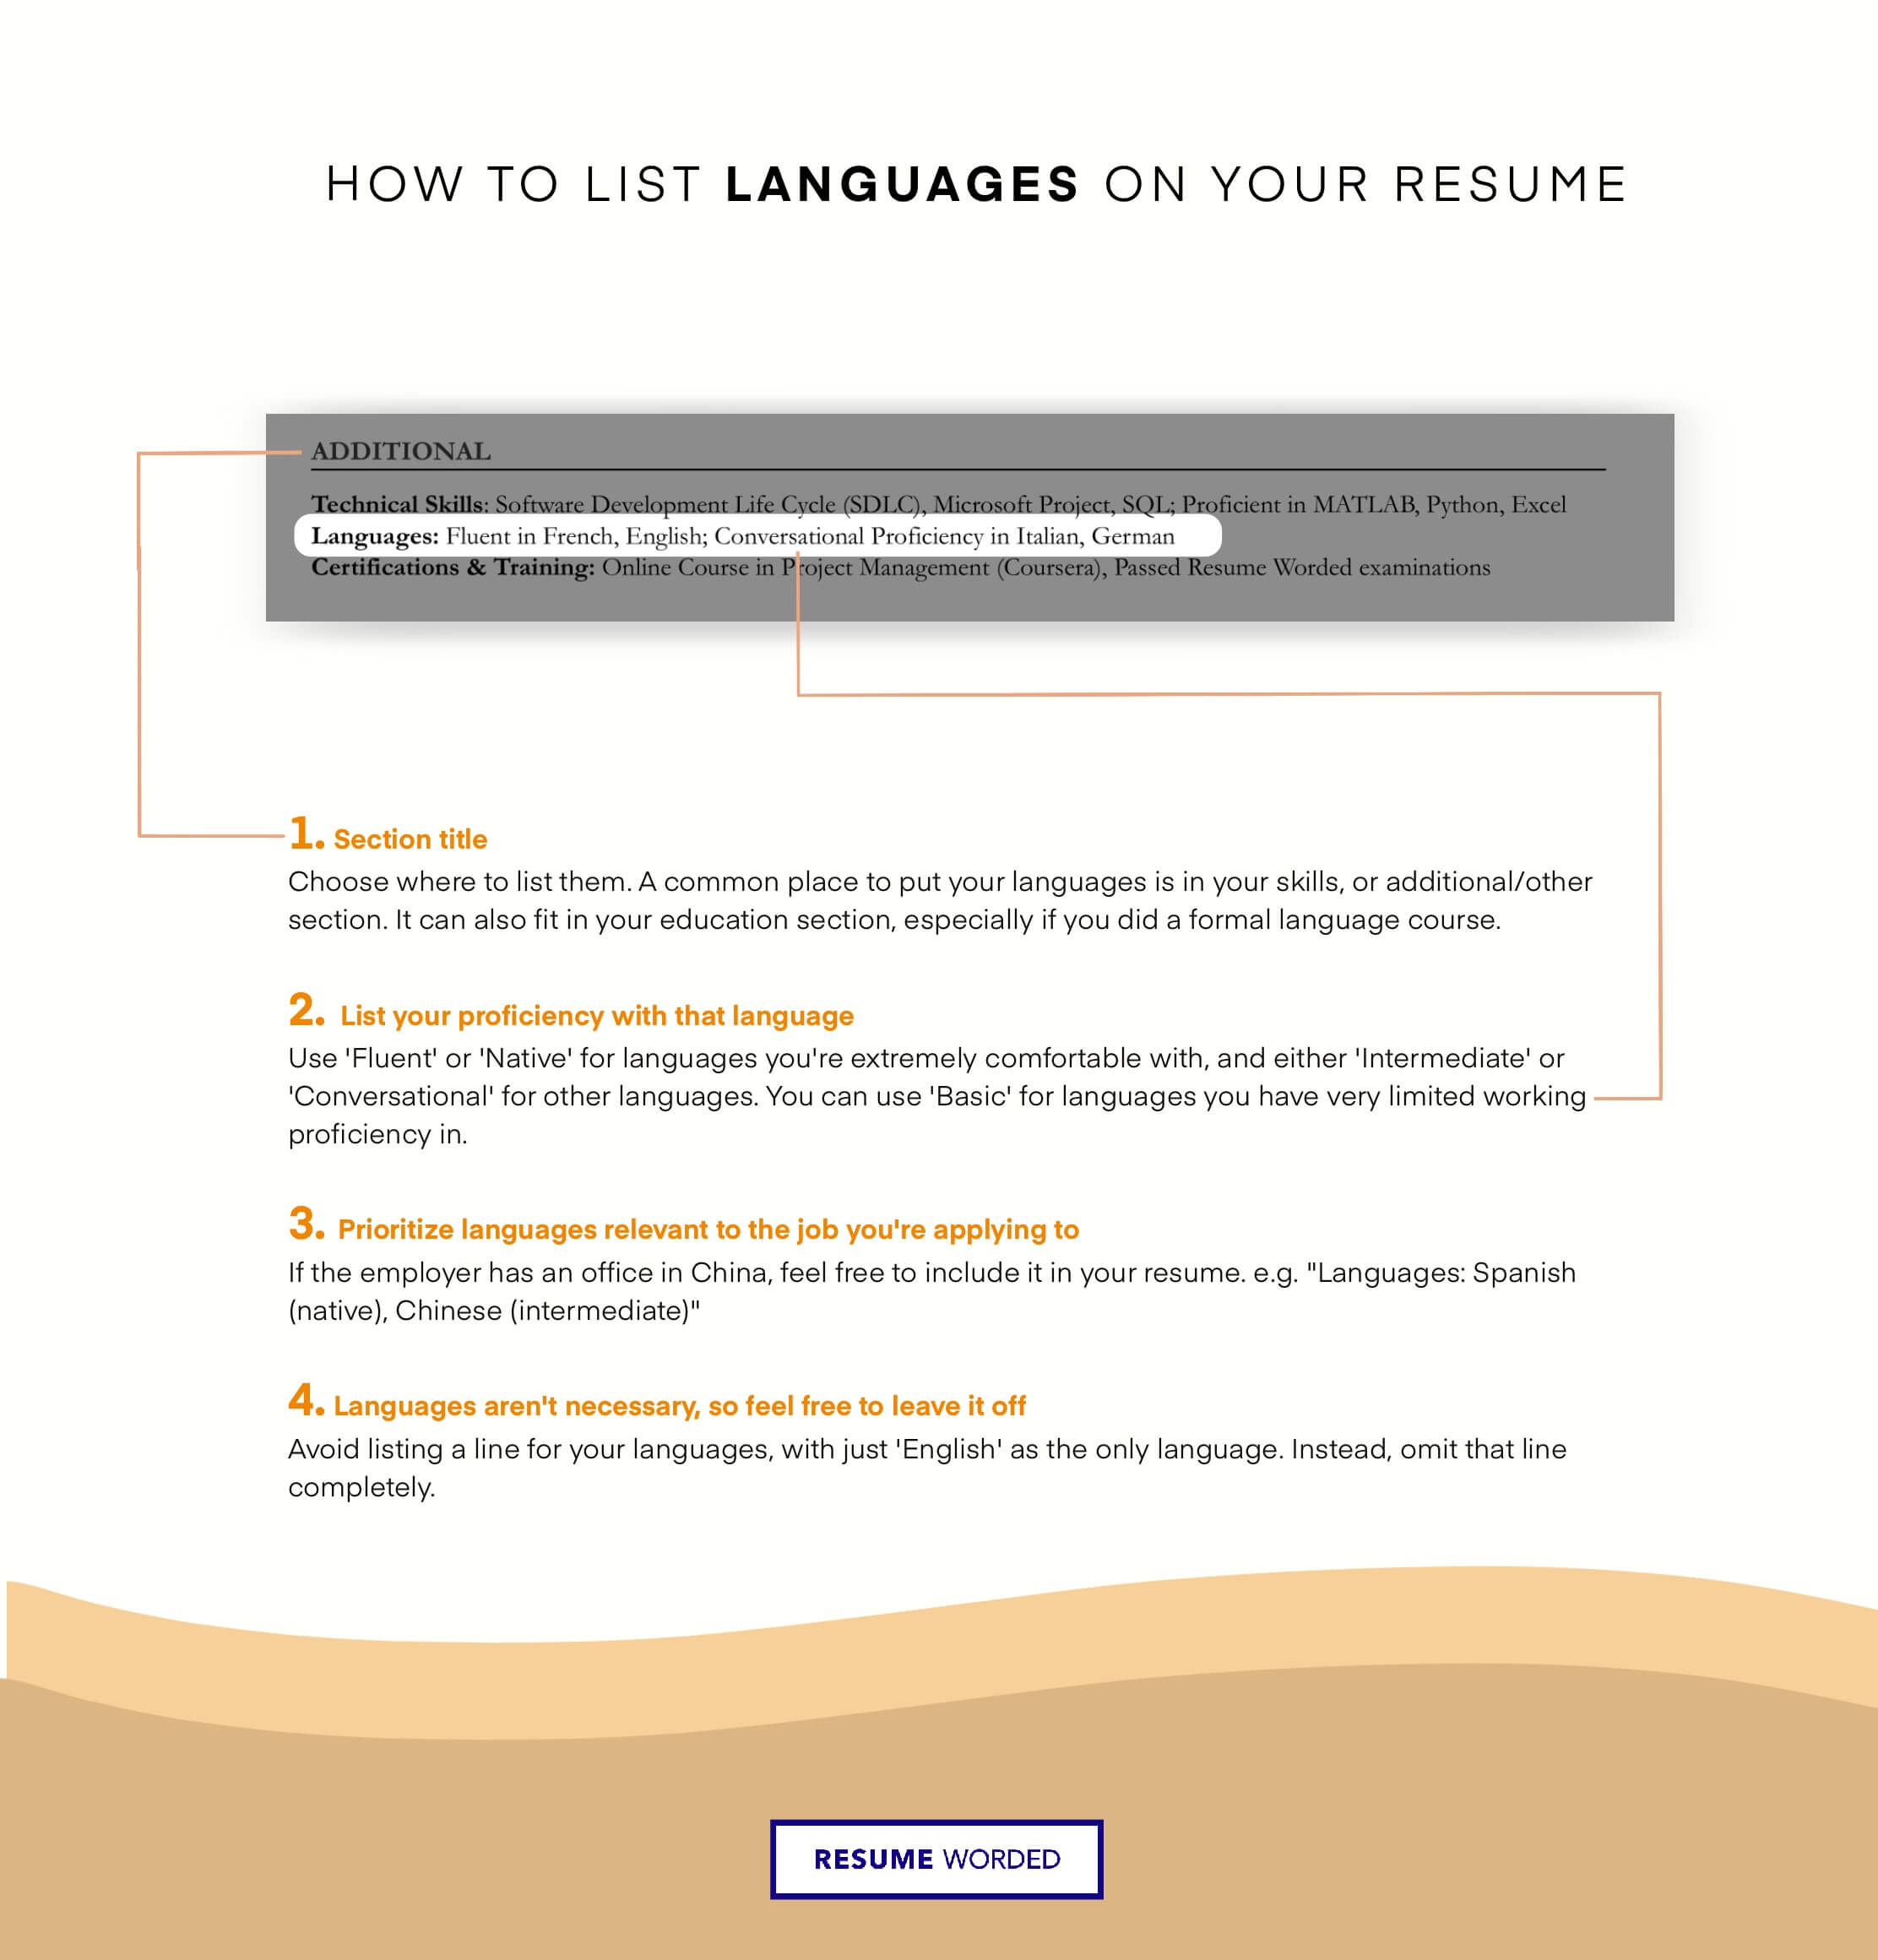 List all languages that you speak. - Call Center Customer Service Rep Resume